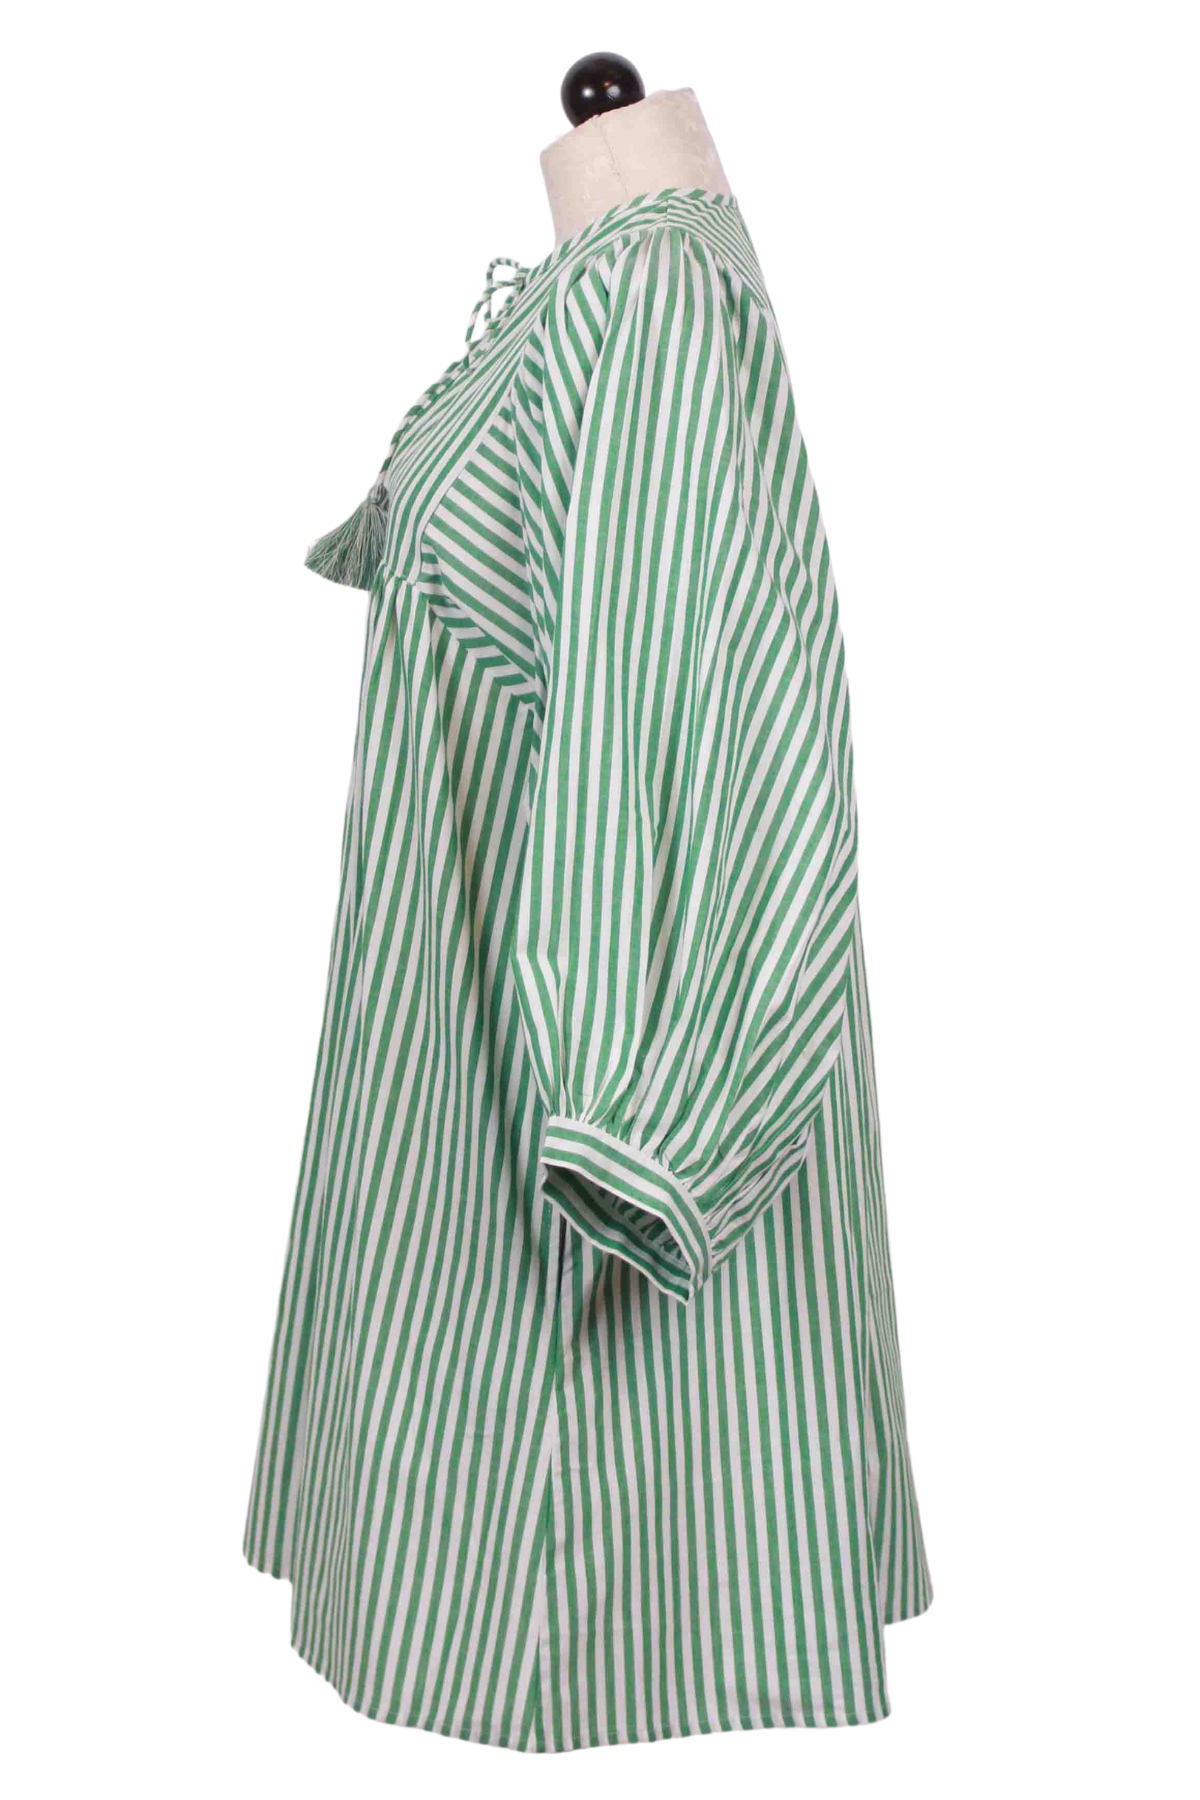 side view of Kelly Green and White Striped Daisy Dress by Mille